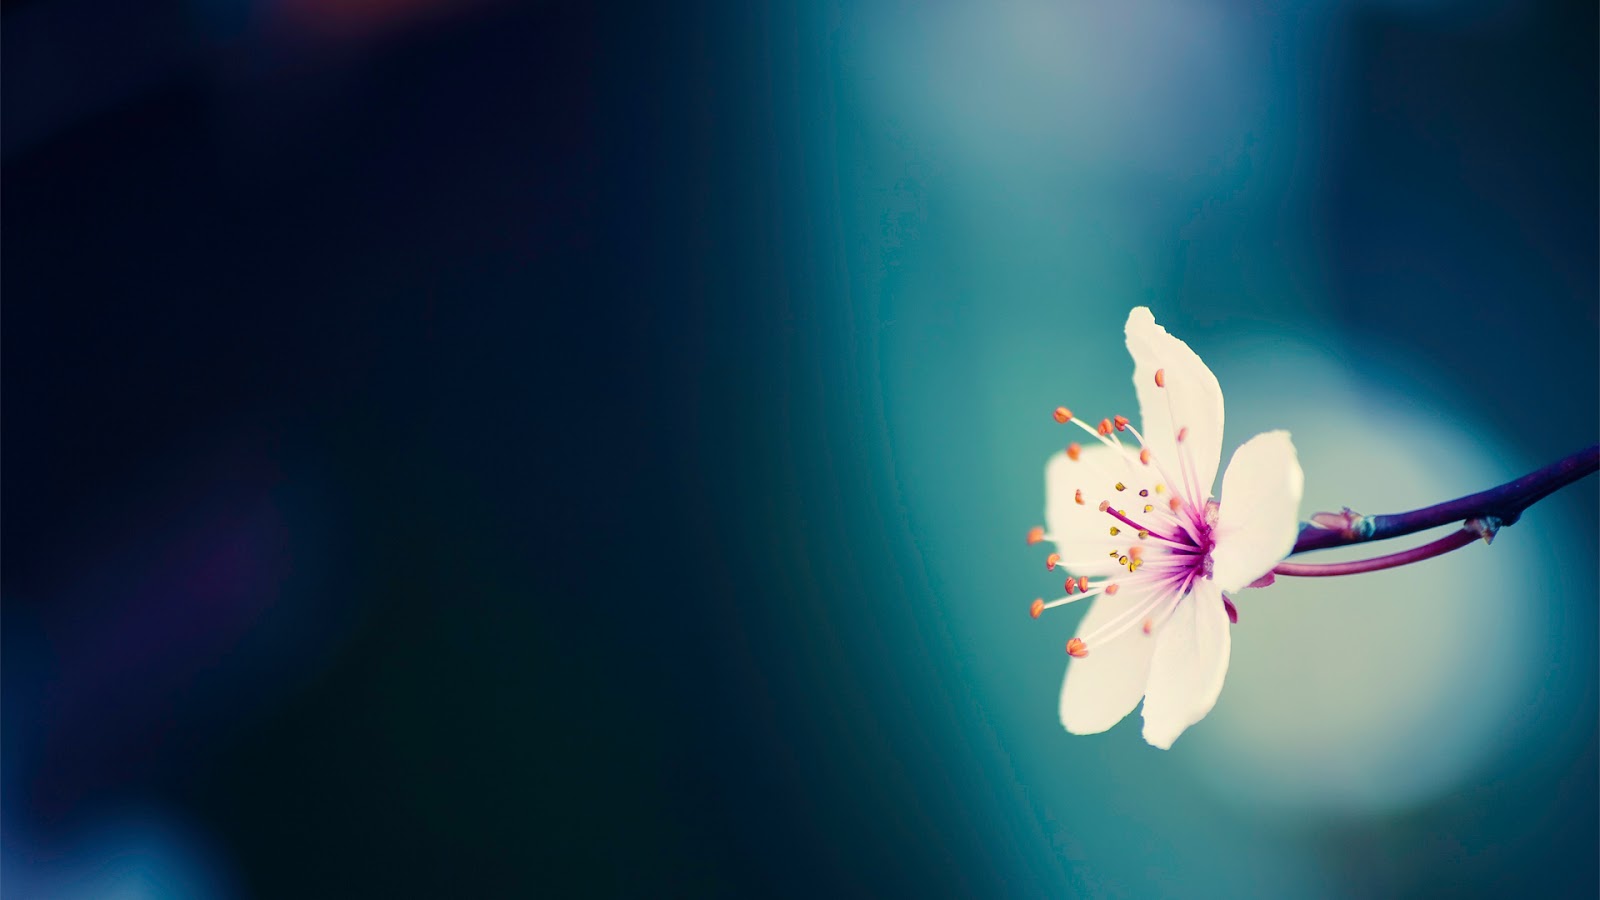 Pretty Flower Background Pictures In High Definition Or